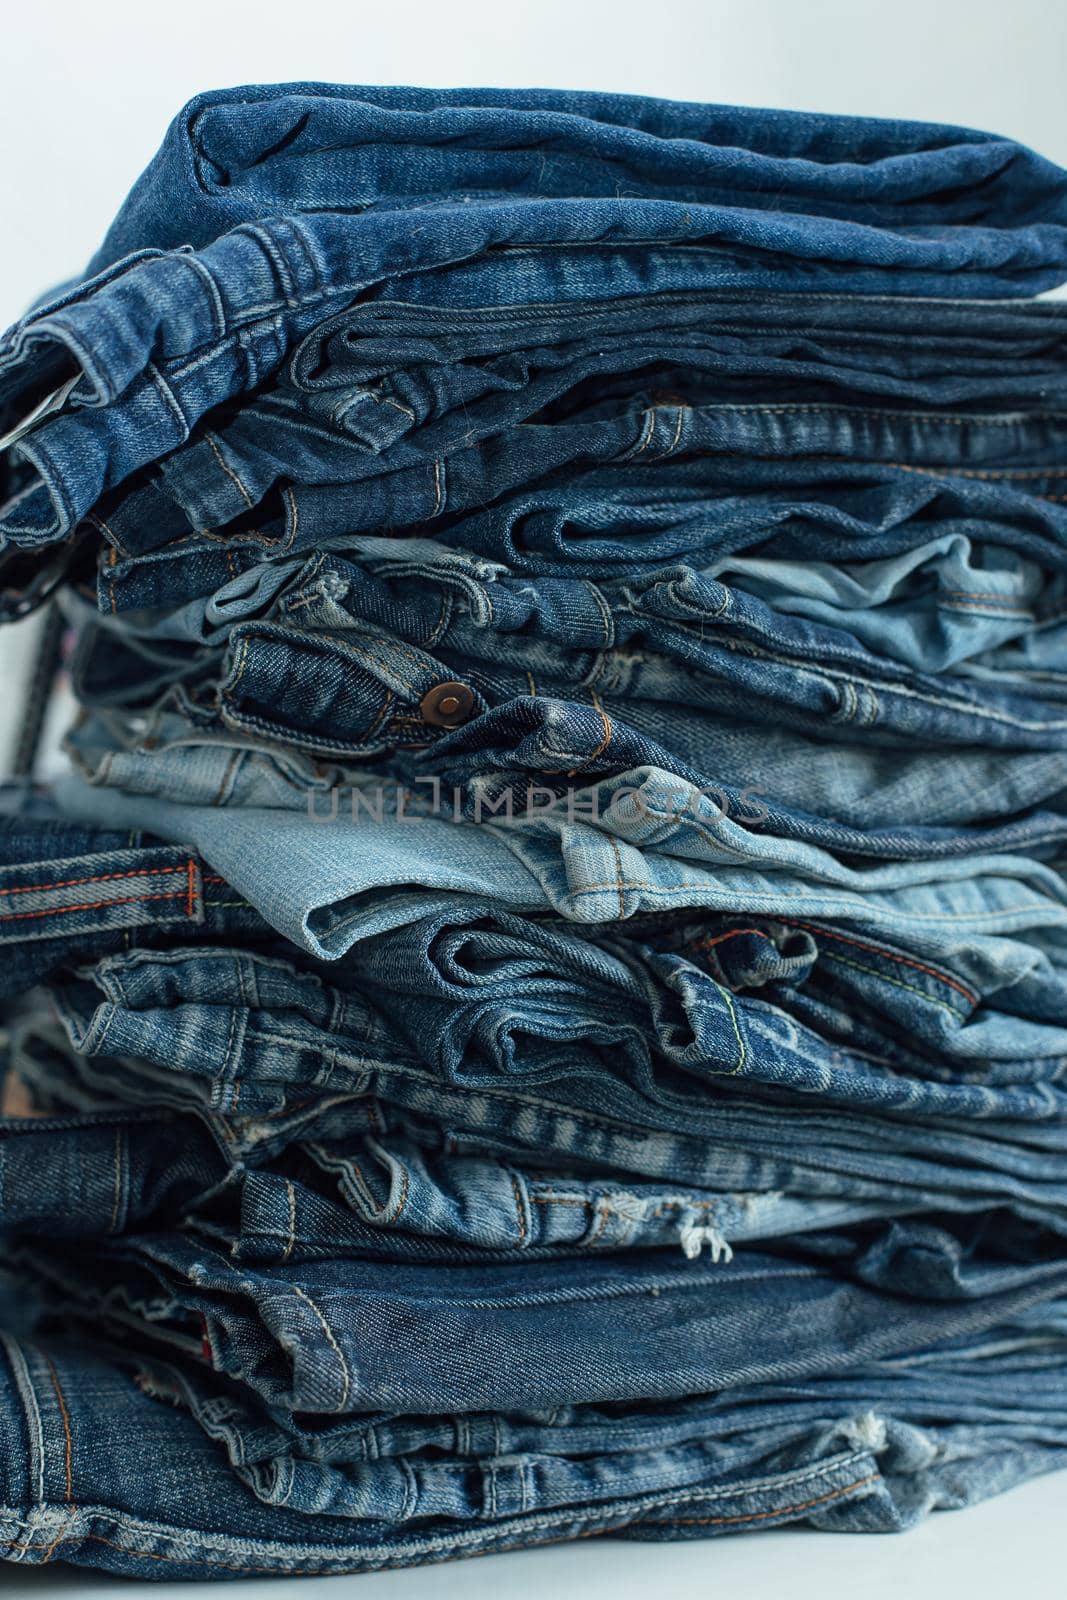 Stack of a stack of old jeans various shades of blue jeans. Denim jeans texture. Denim background texture for design. Canvas denim texture. Blue denim background.